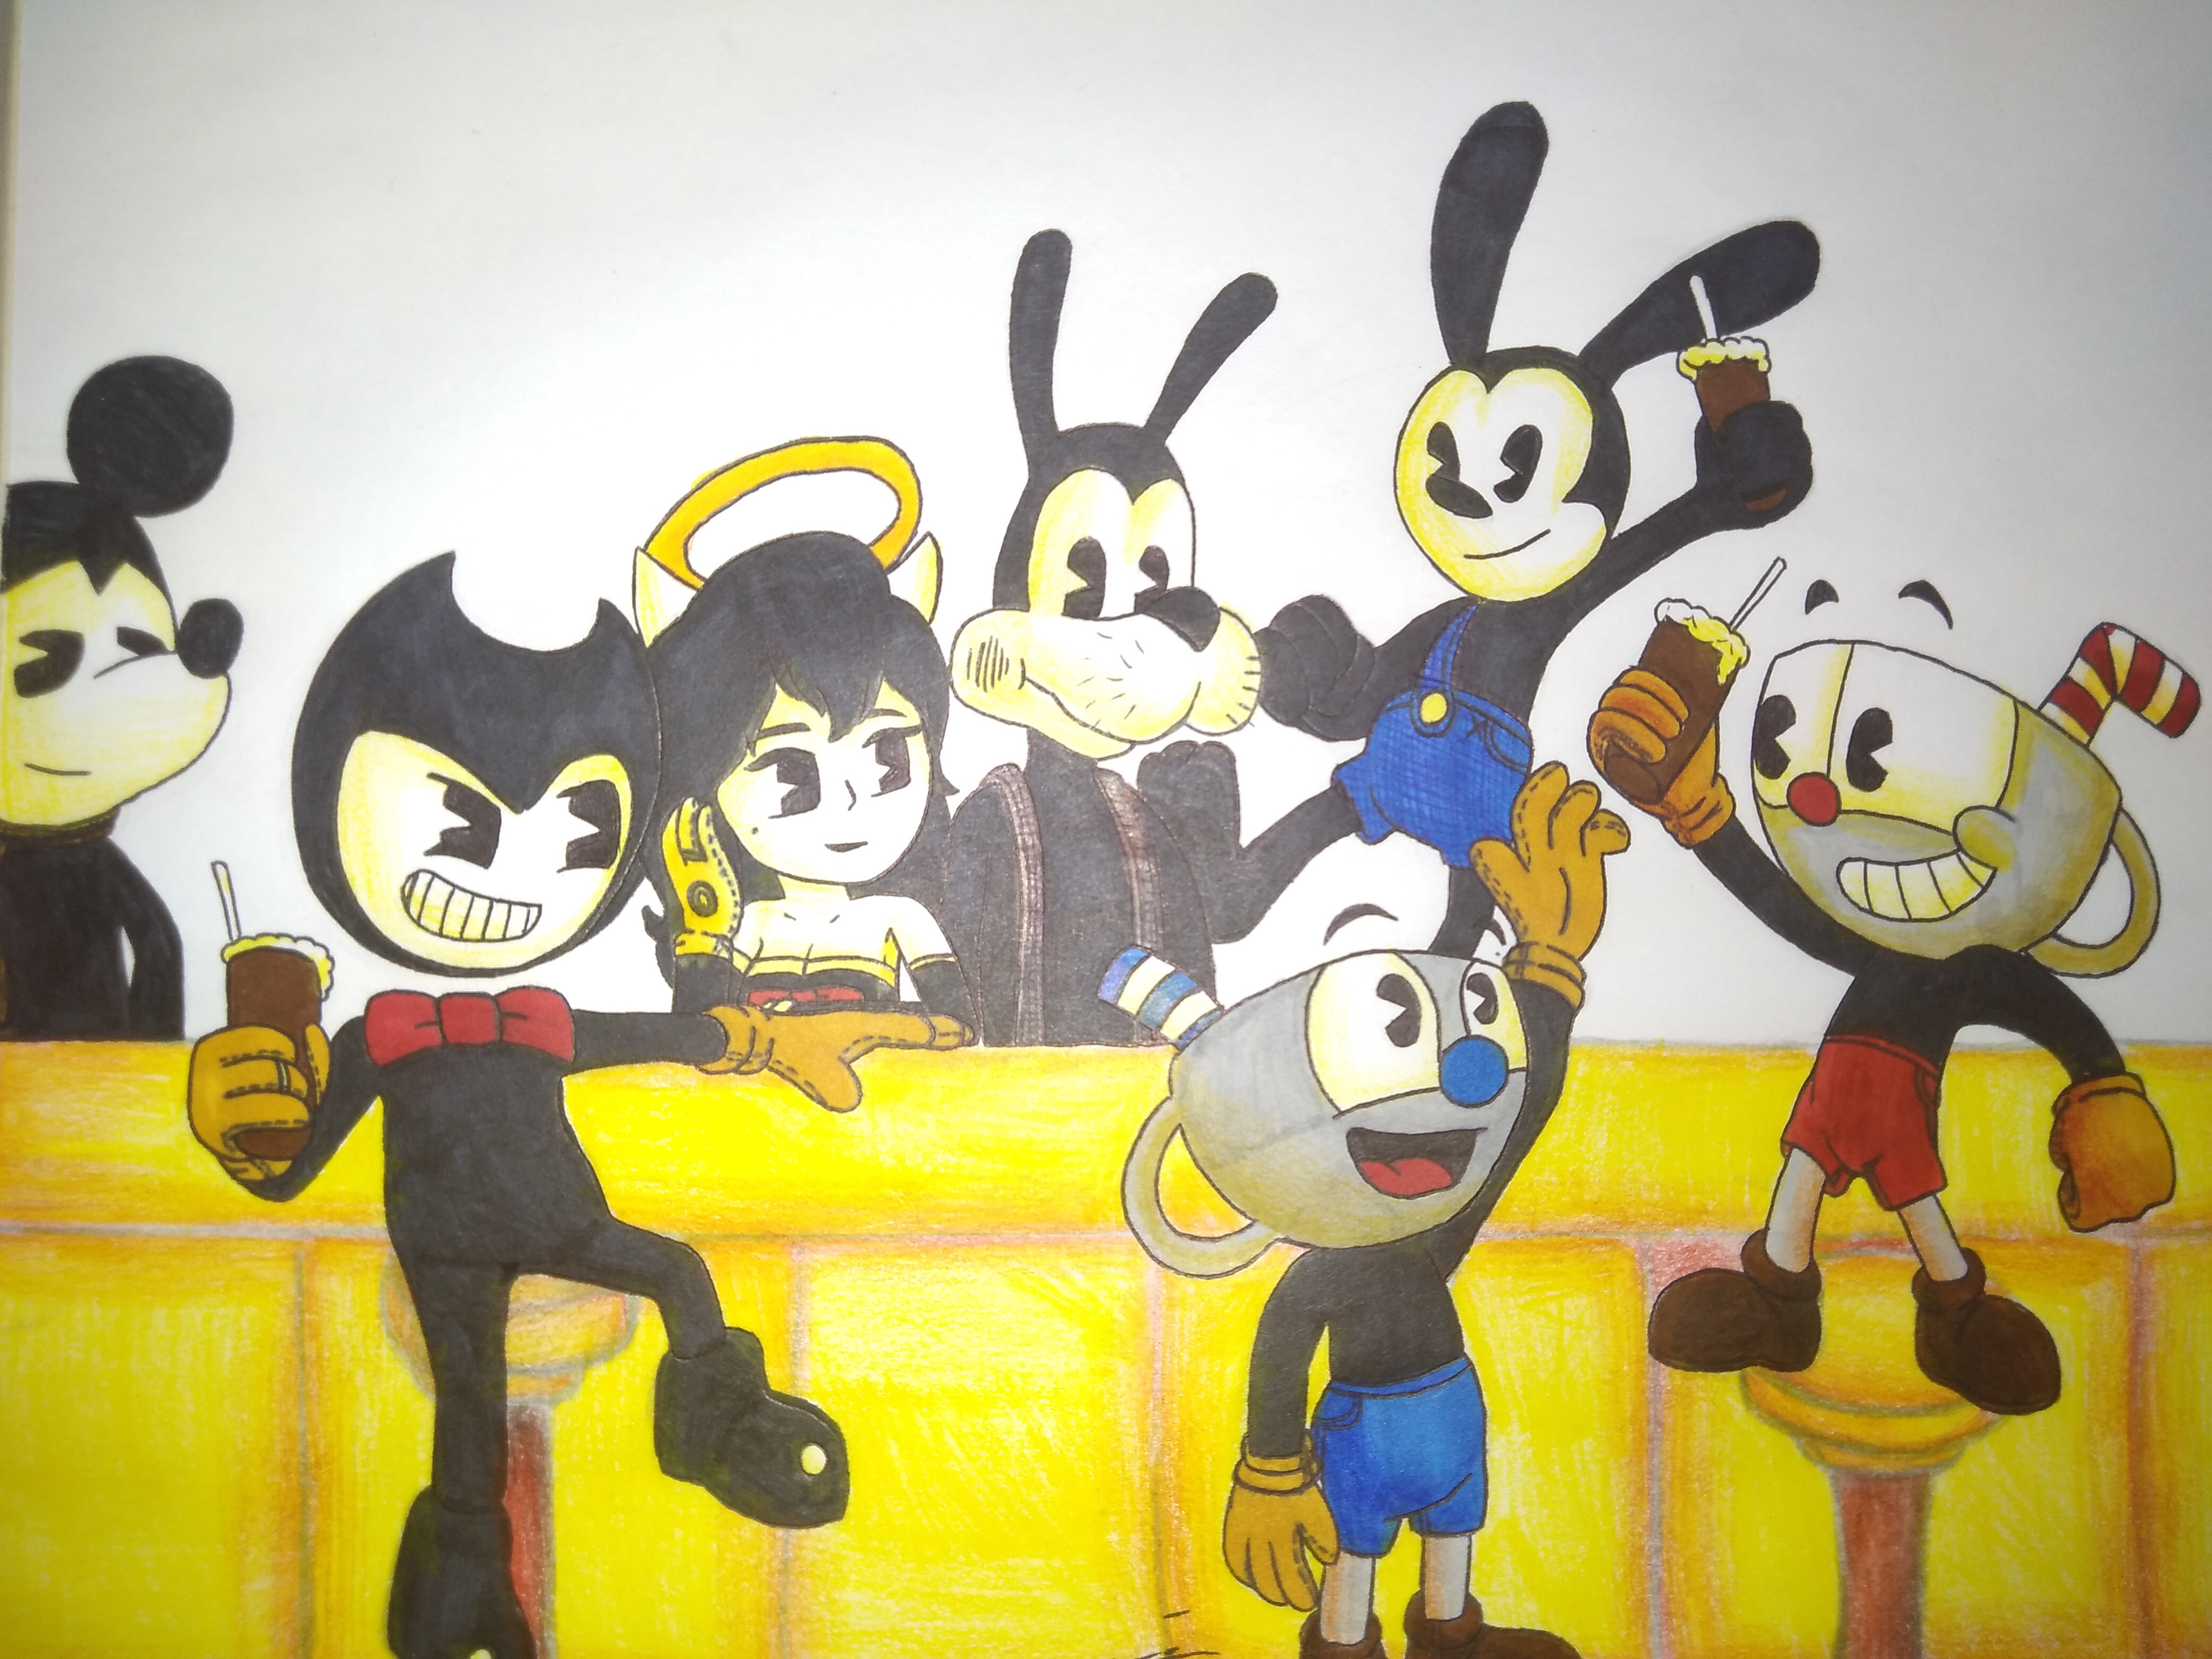 Bendy as Cuphead show style by Galacycutie on DeviantArt